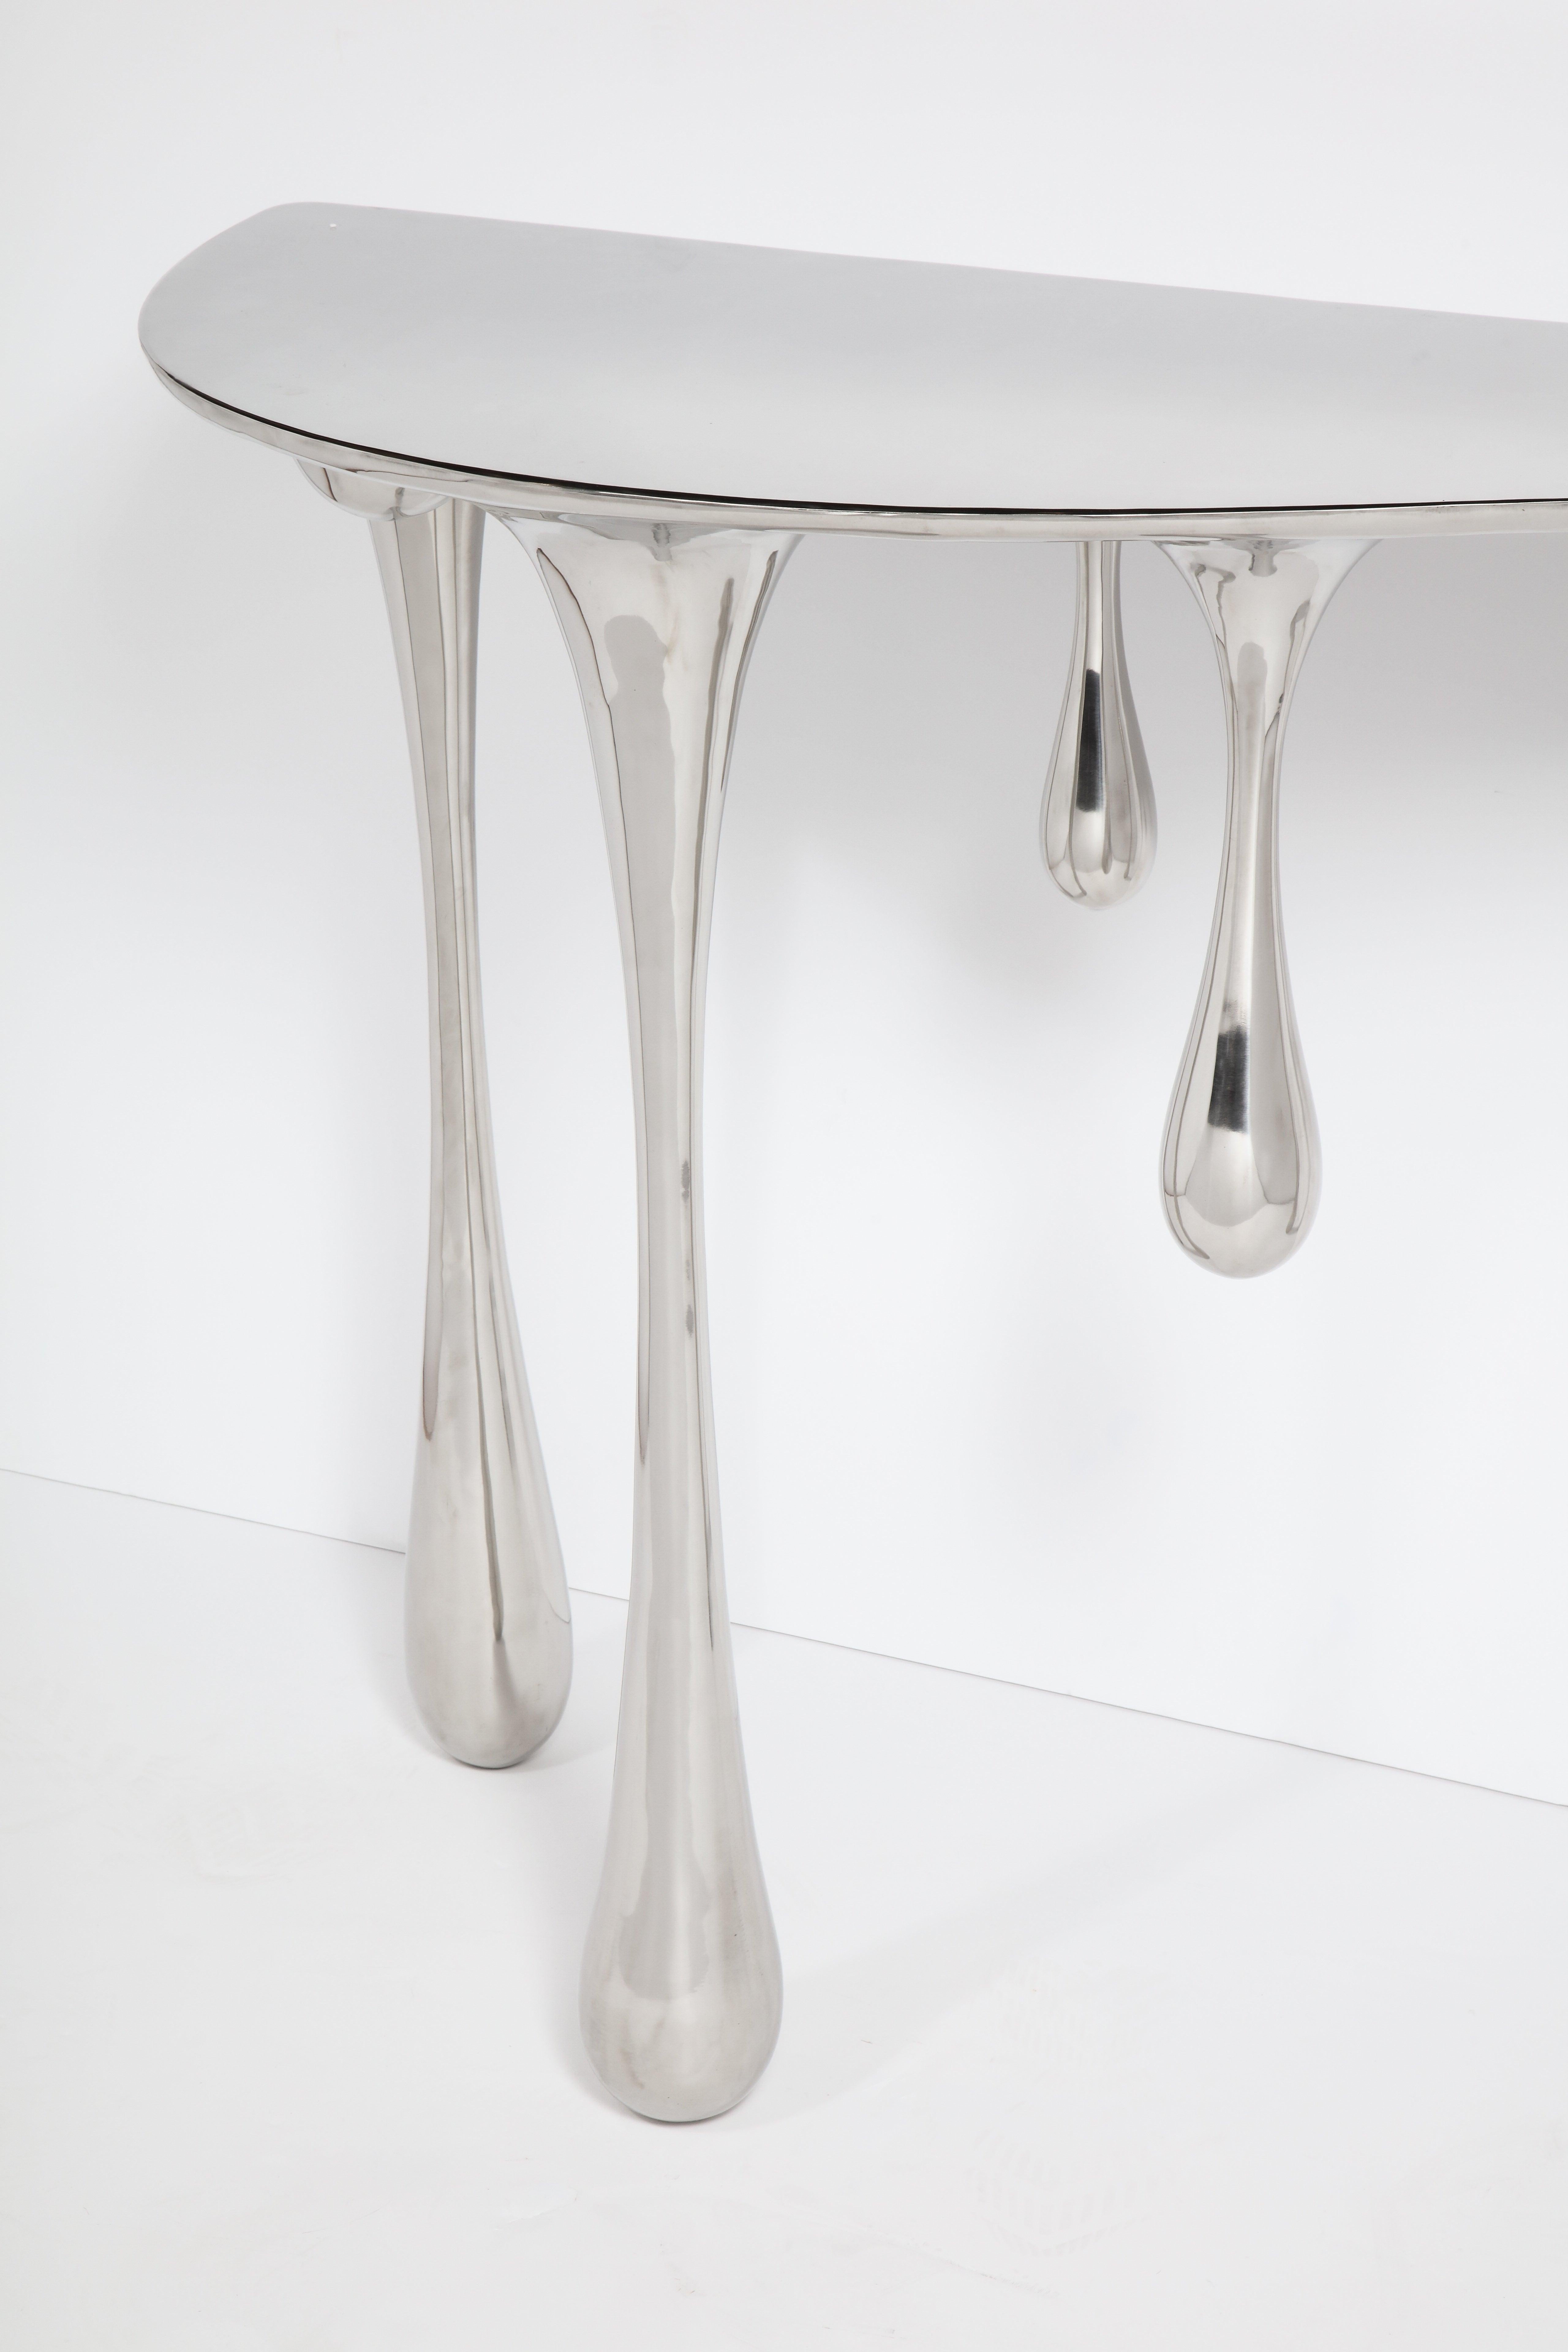 Contemporary Dripping Console Table No.2 Hallway Entry Table Stainless Steel Customizable For Sale